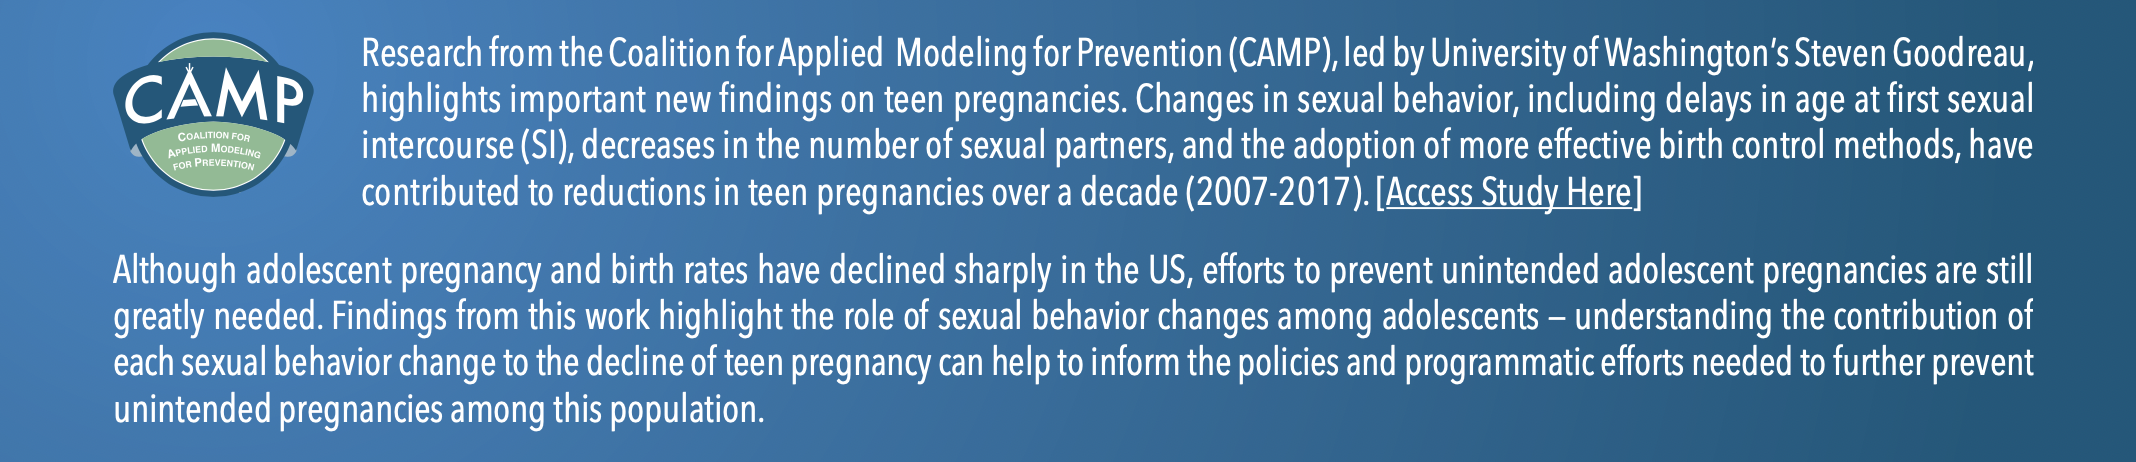 Declines in Pregnancies among U.S. Adolescents from 2007 to 2017: Behavioral Contributors to the Trend